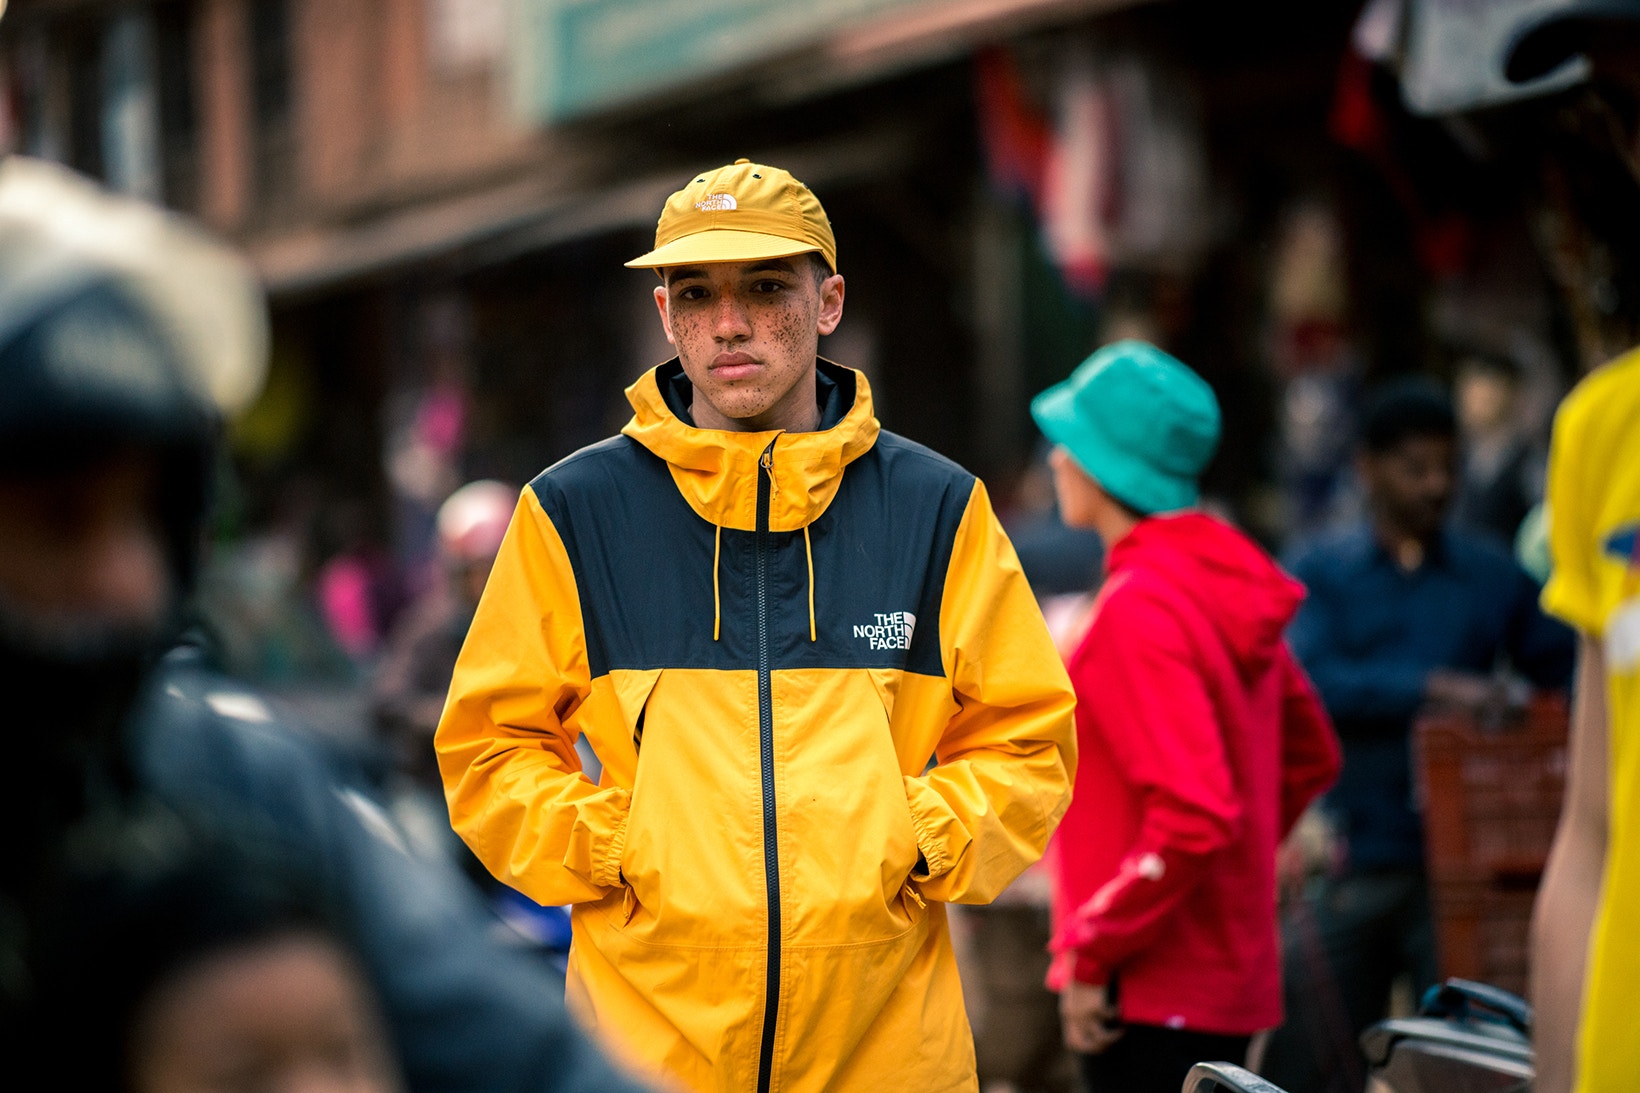 The North Face Journeys Through the Streets of Nepal With Its Latest